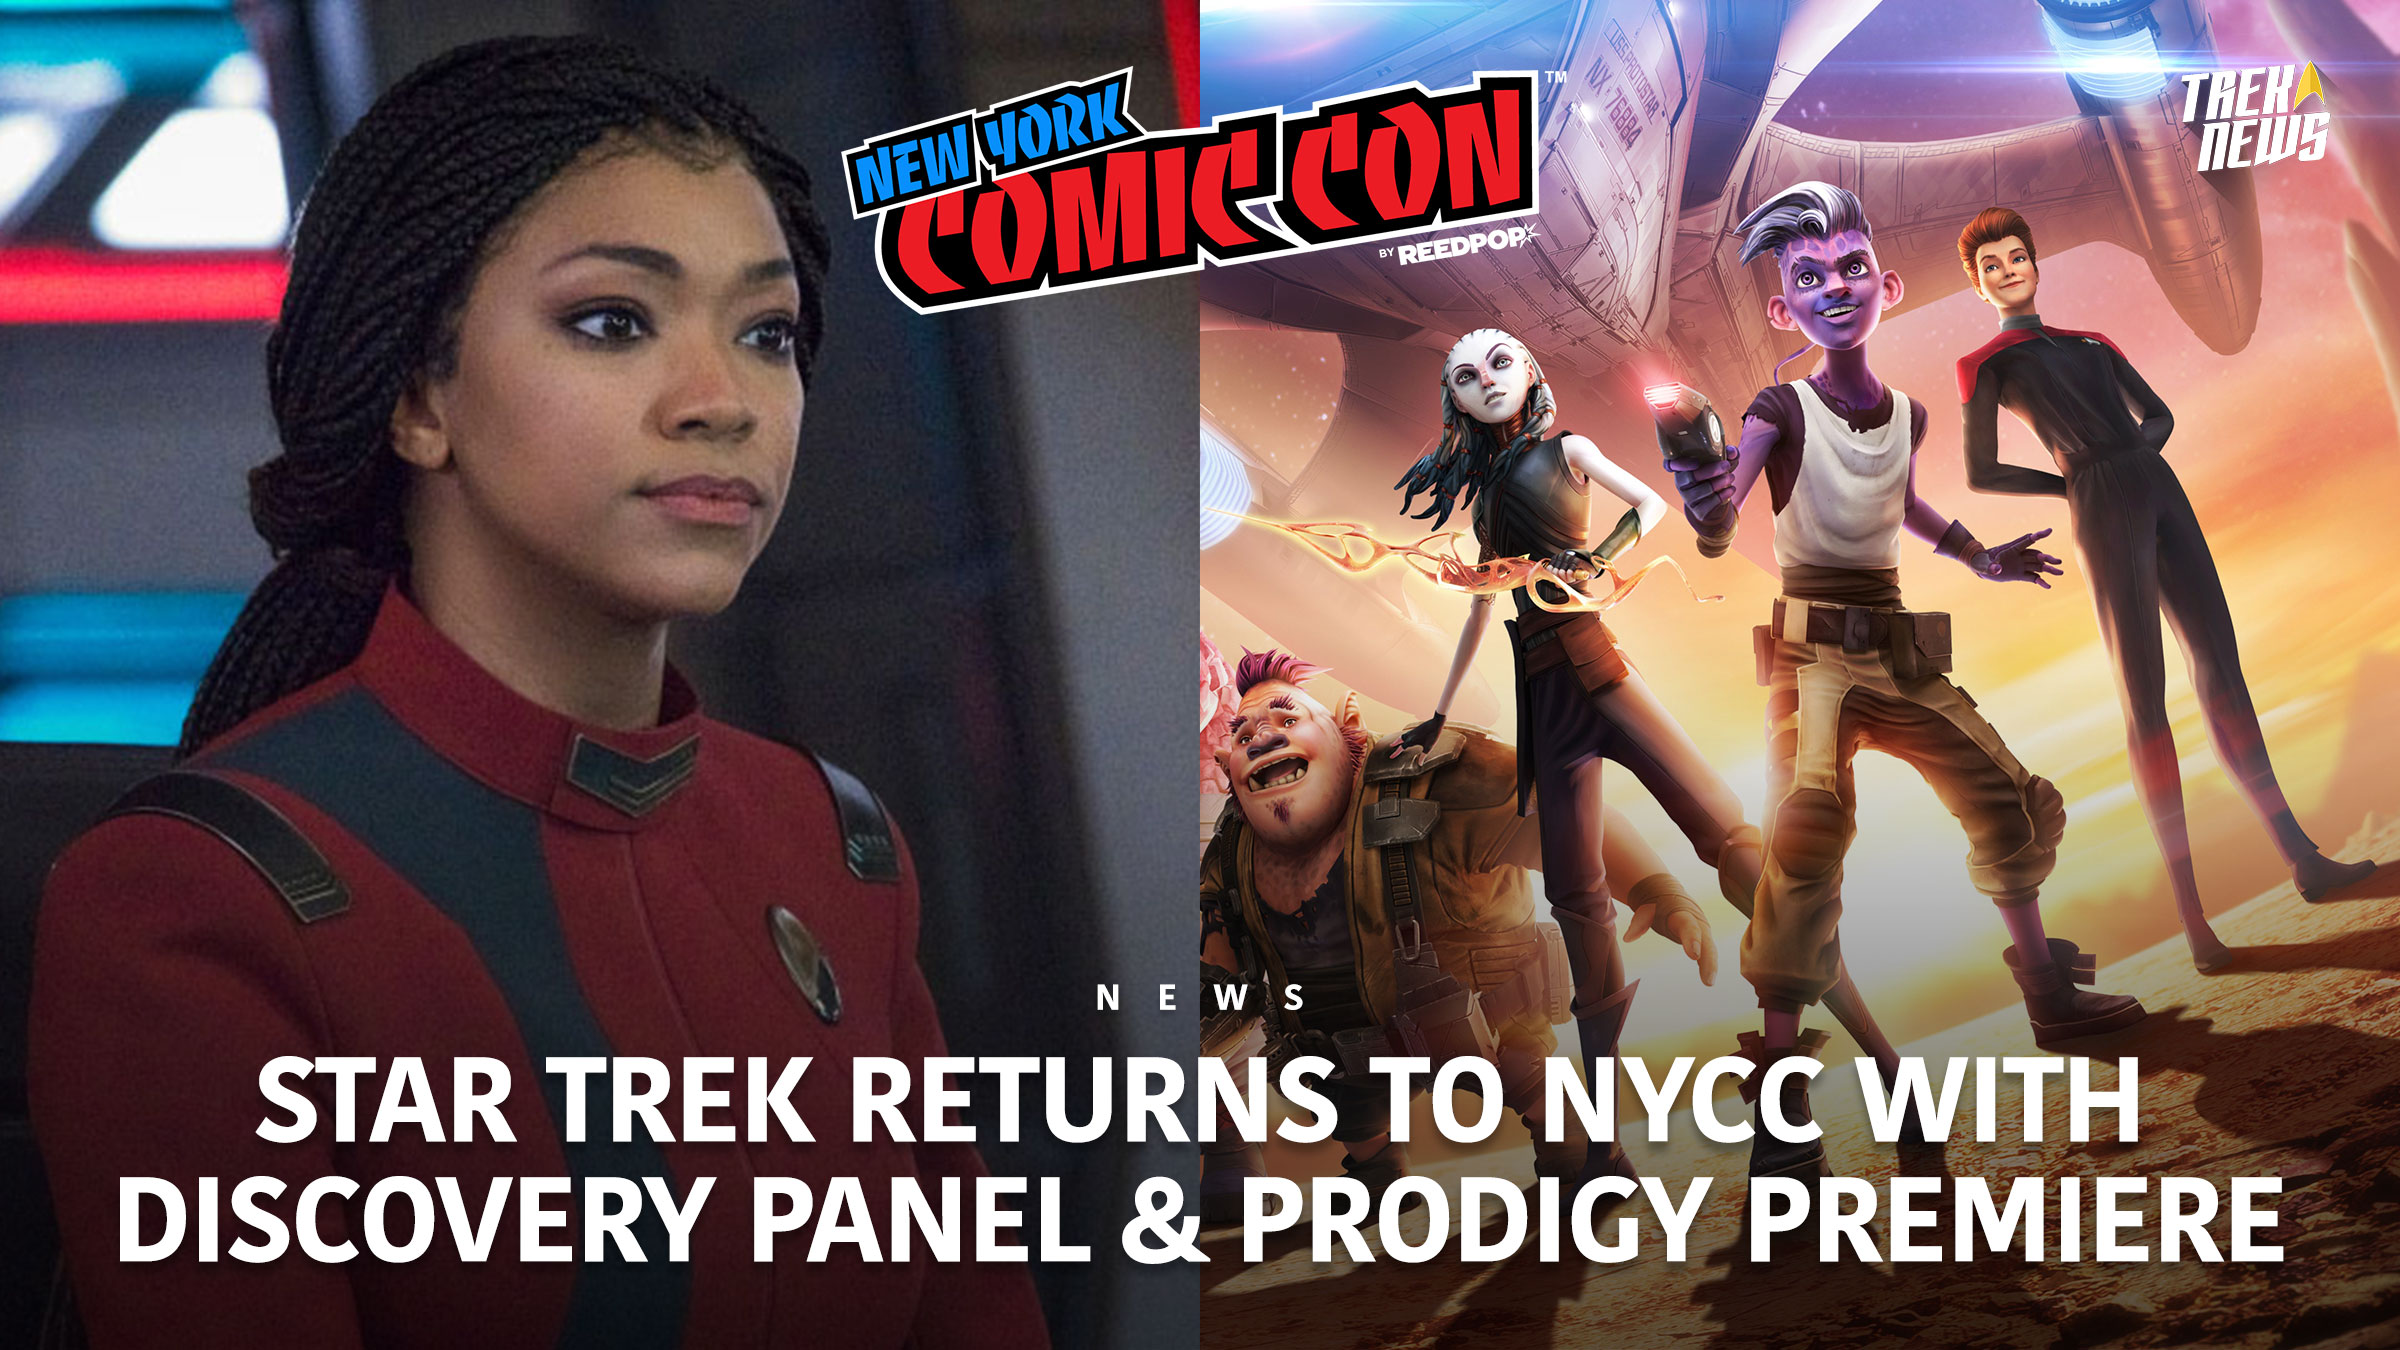 Star Trek Returns To New York Comic Con This Weekend With Prodigy Premiere And Discovery Panel